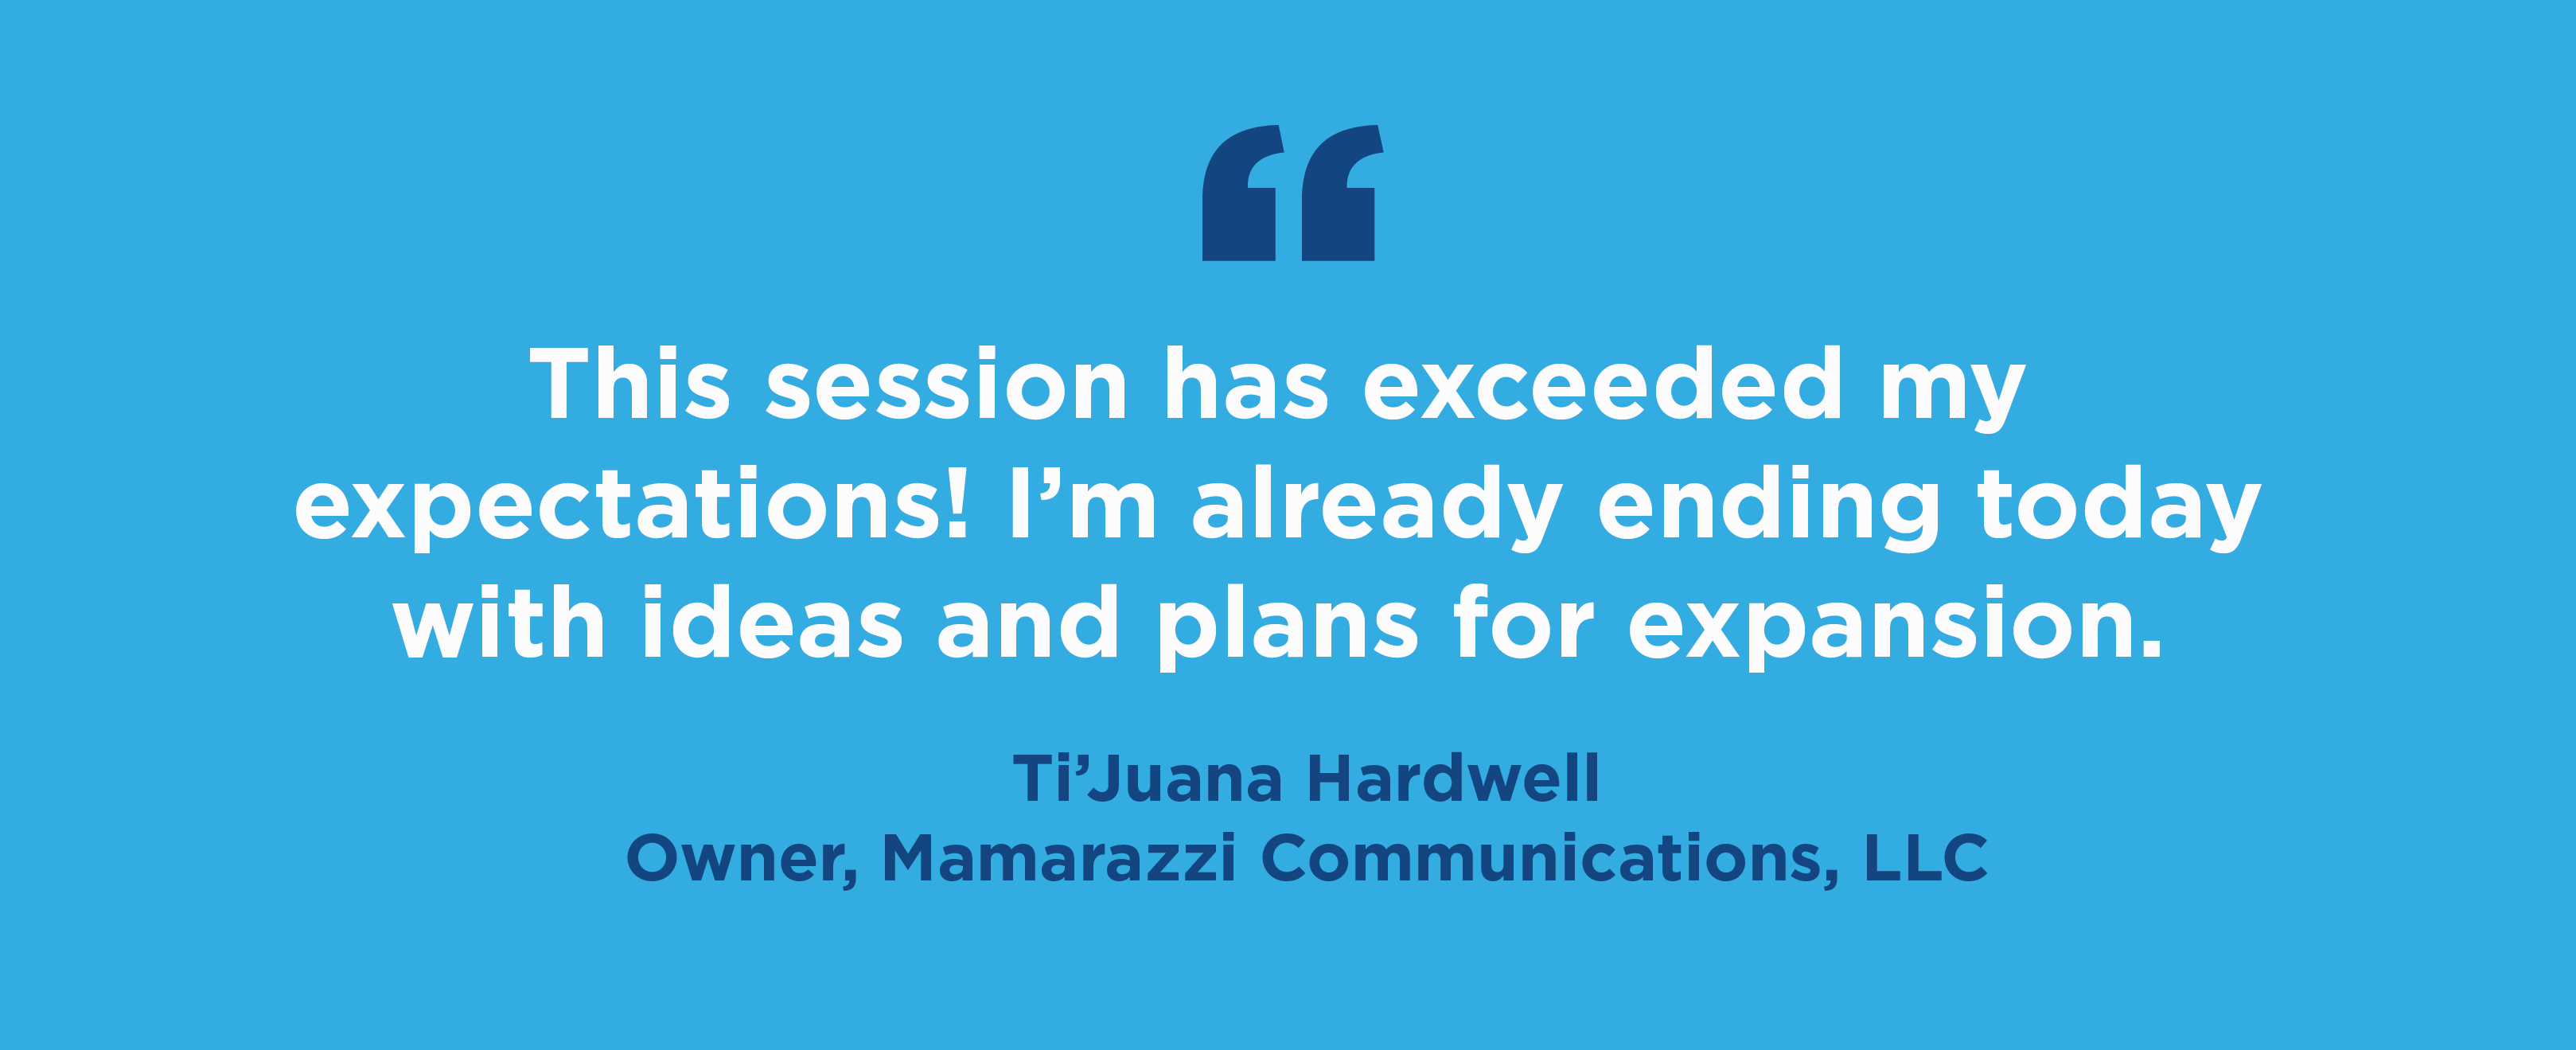 Open quote. This session has exceeded by expectations! I'm already ending today with ideas and plans for expansion. Close quote by Ti'Juana Hardwell, Owner, Mamarazzi Communications, LLC.